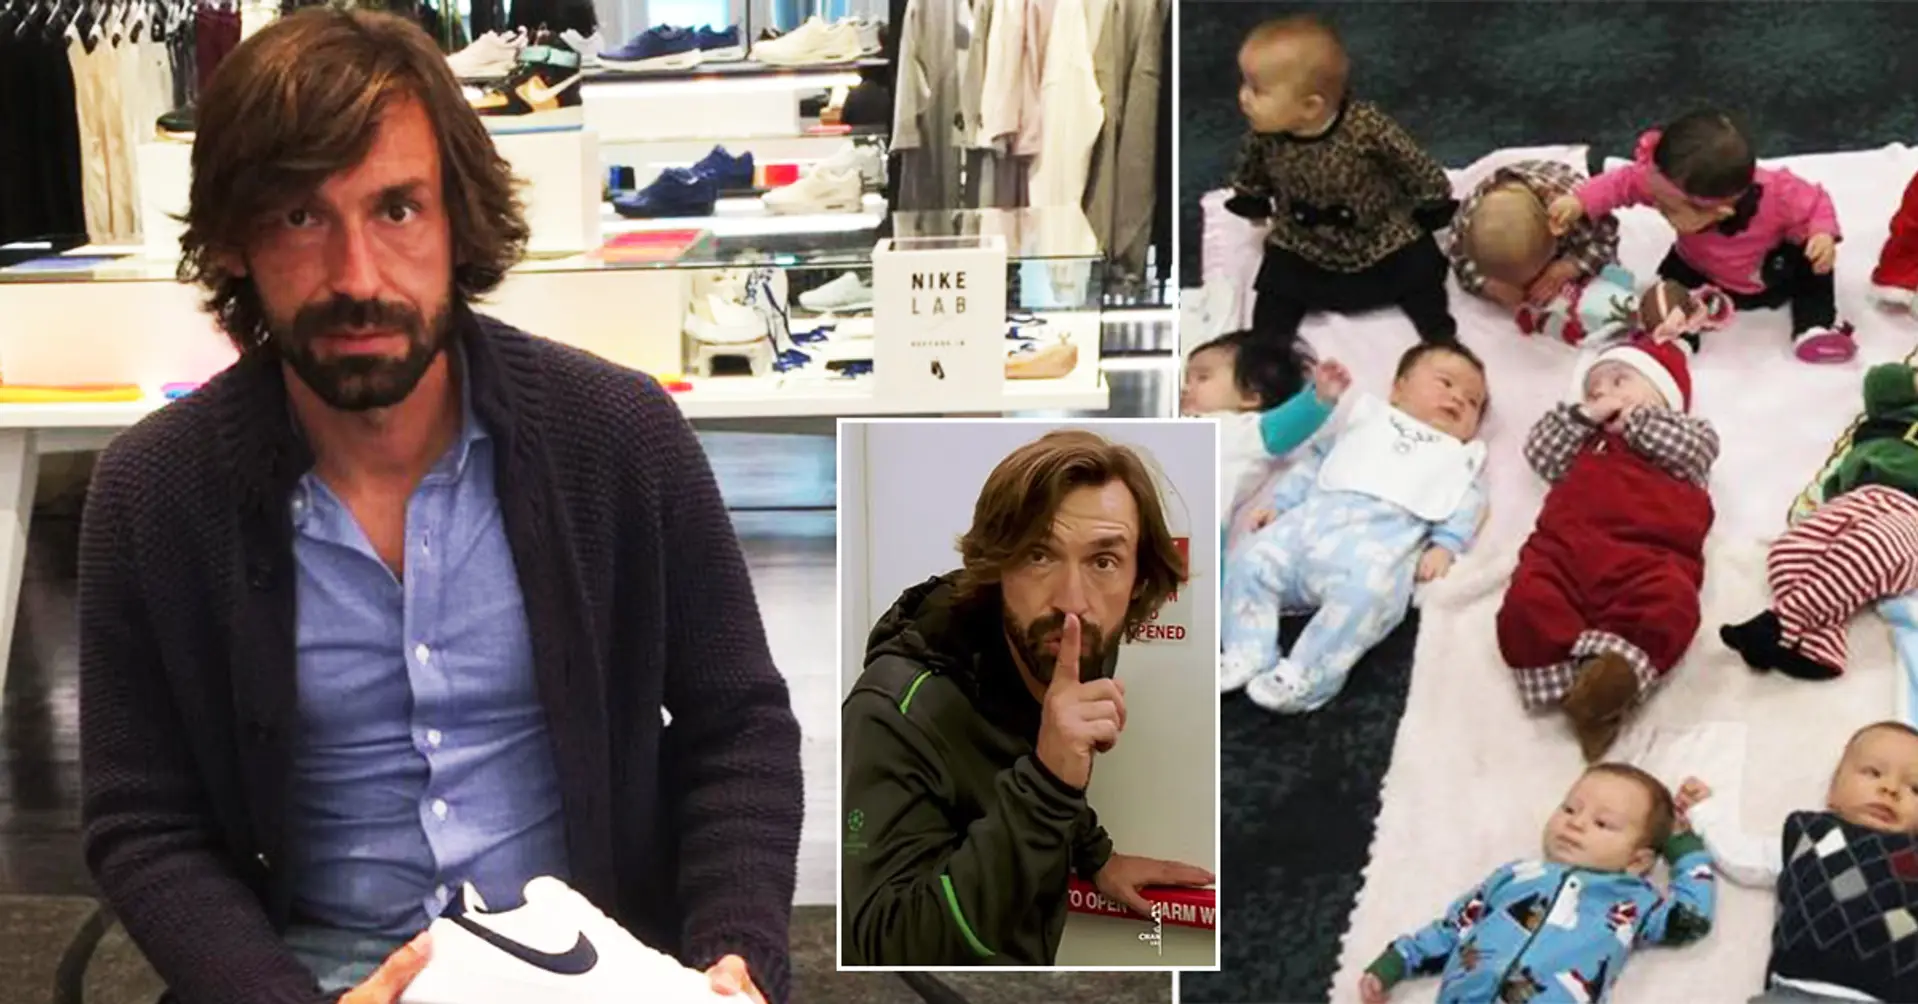 🌍 Global Watch: Fan who promised Andrea Pirlo to name his son after him officially announce that 'Little Pirlo' was born